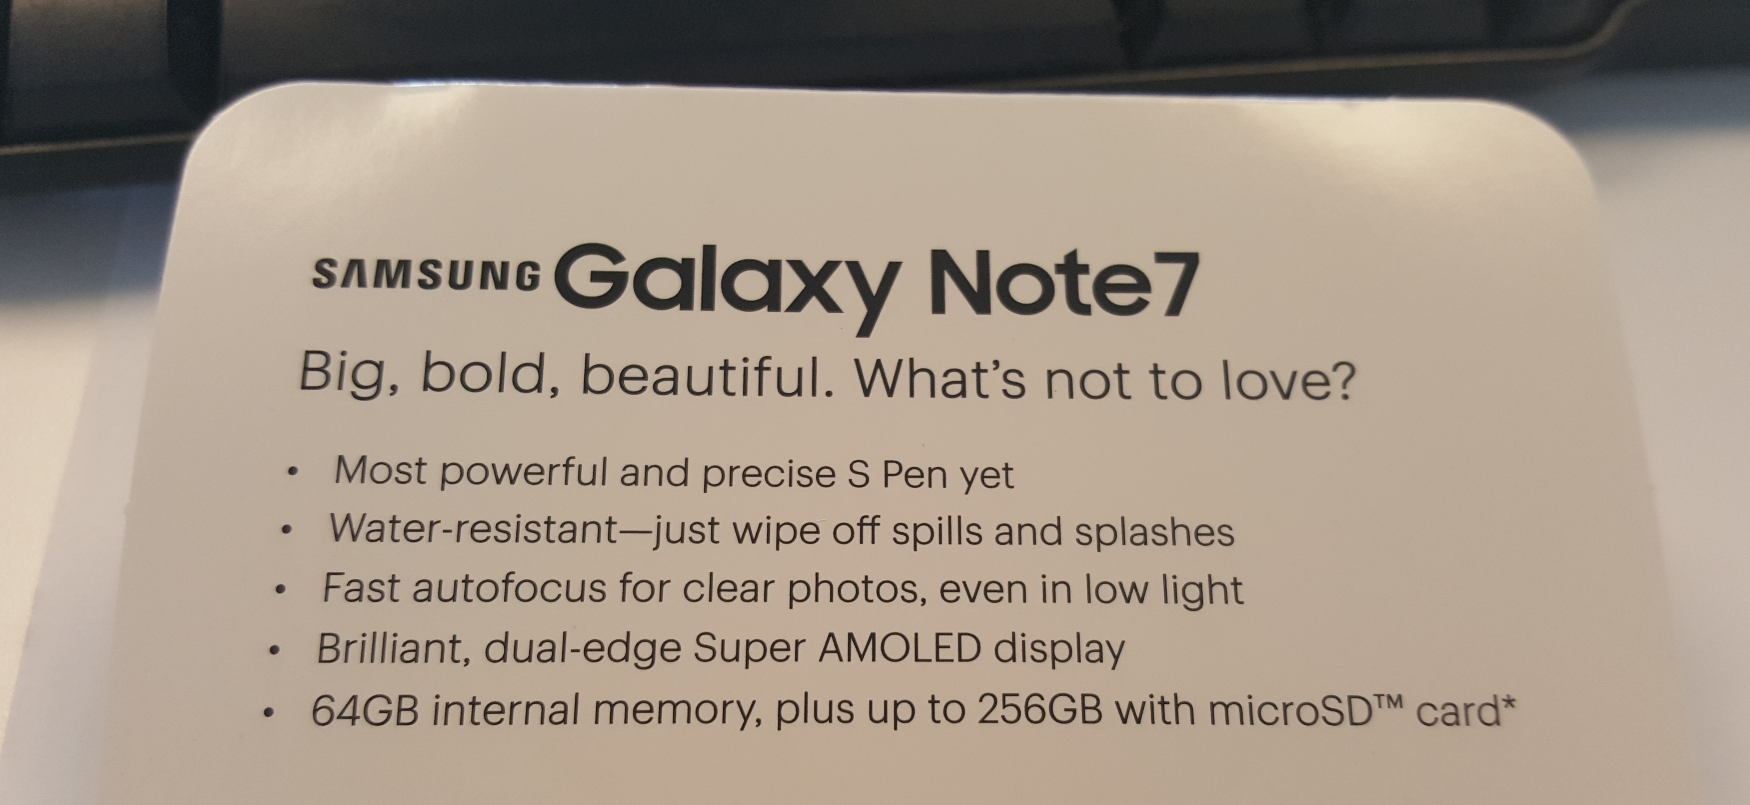 Sprint planogram for the Samsung Galaxy Note 7 reveals some information about the phablet - Sprint planogram calls Samsung Galaxy Note 7 "big, bold, beautiful," reveals several features